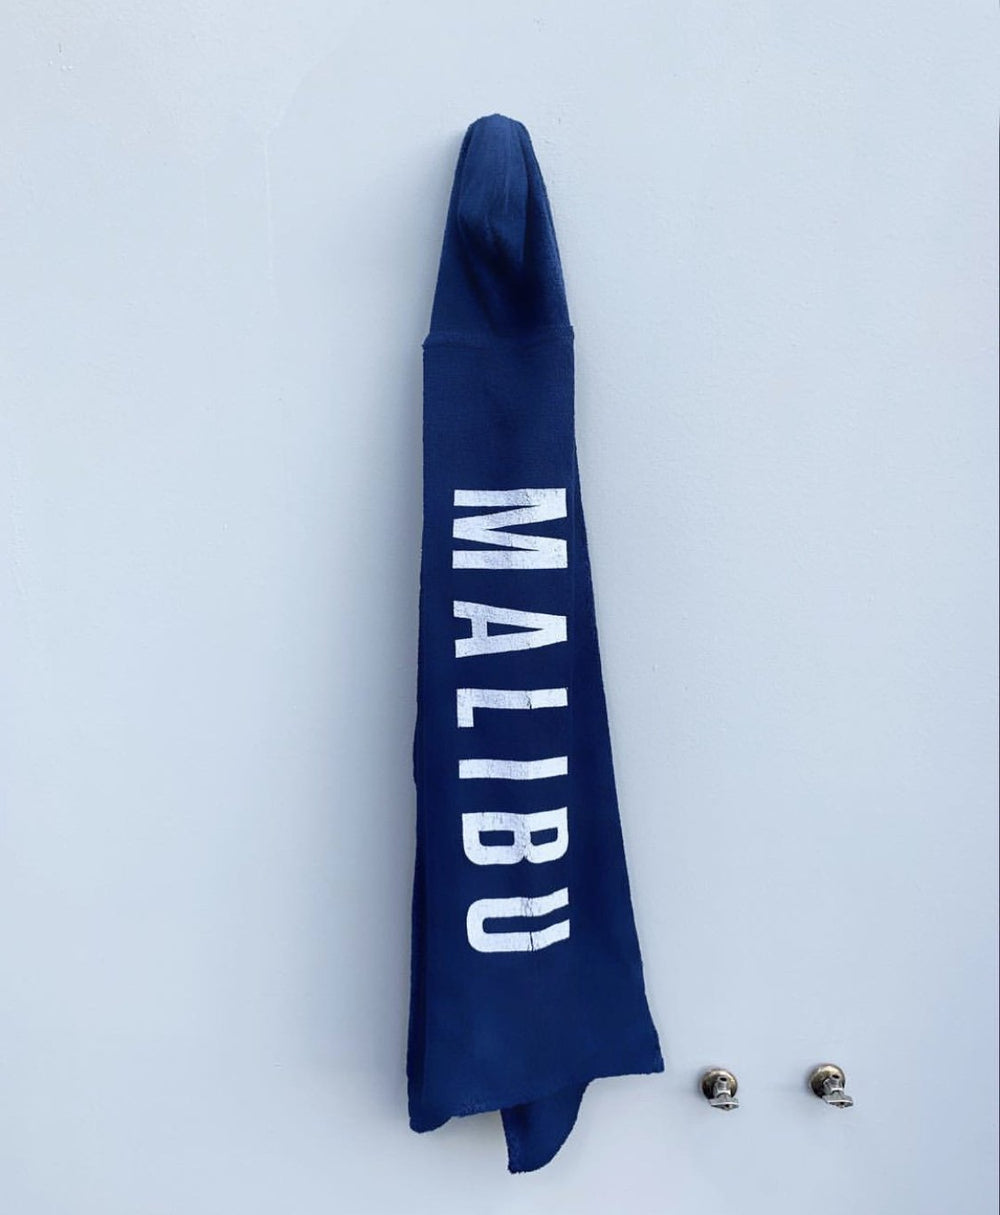 One Gun Ranch Kids Hooded Beach Towels. Blue terry cloth with Malibu printed in white text down the side. 